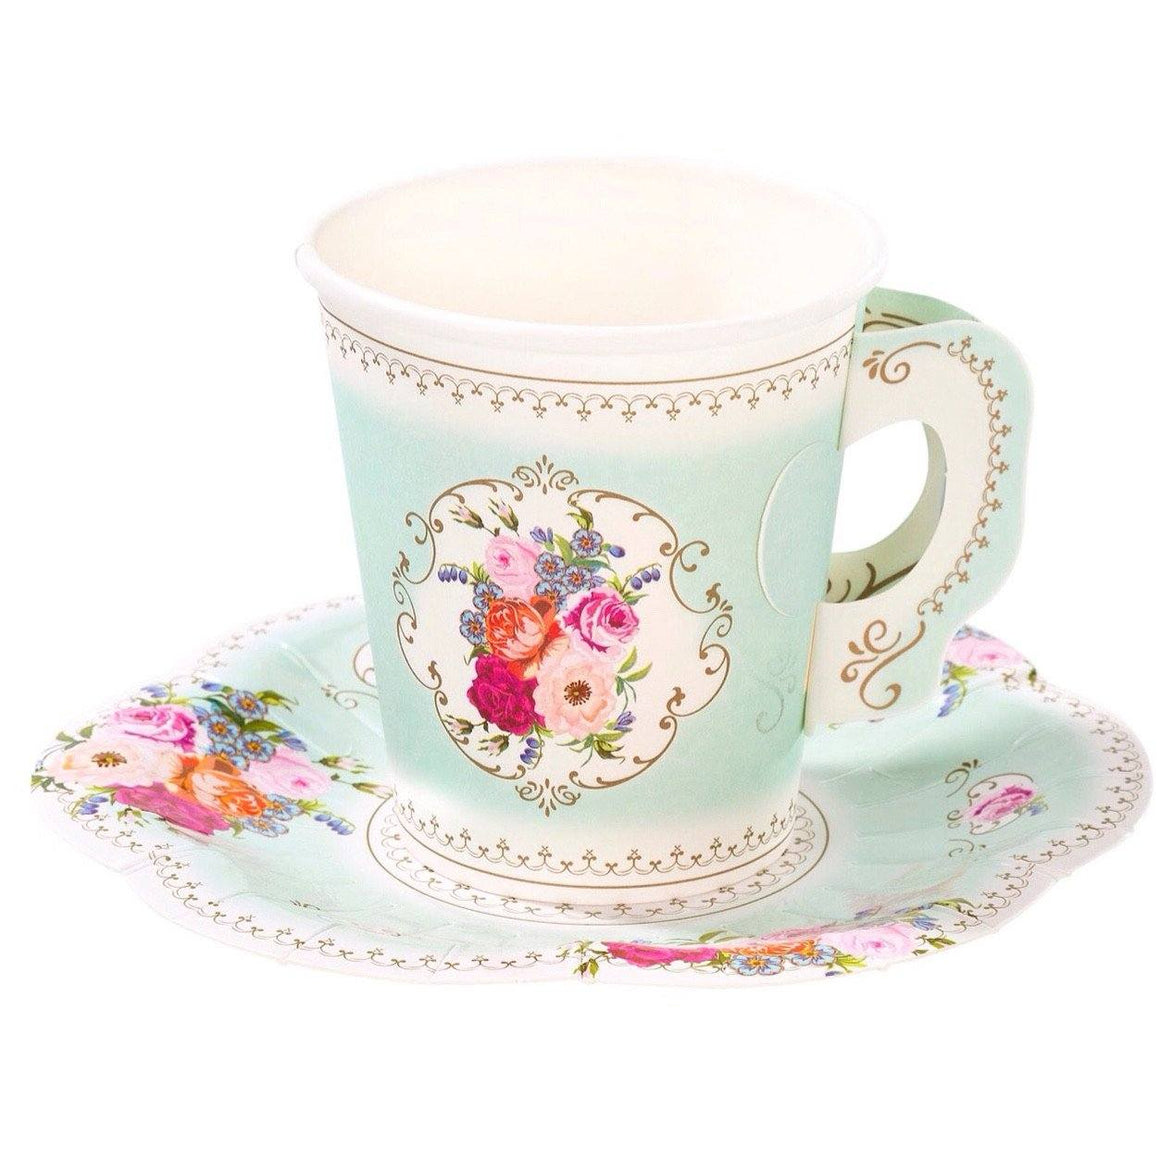 CUPS - FLORAL TEACUP + SAUCER TRULY SCRUMPTIOUS TALKING TABLES